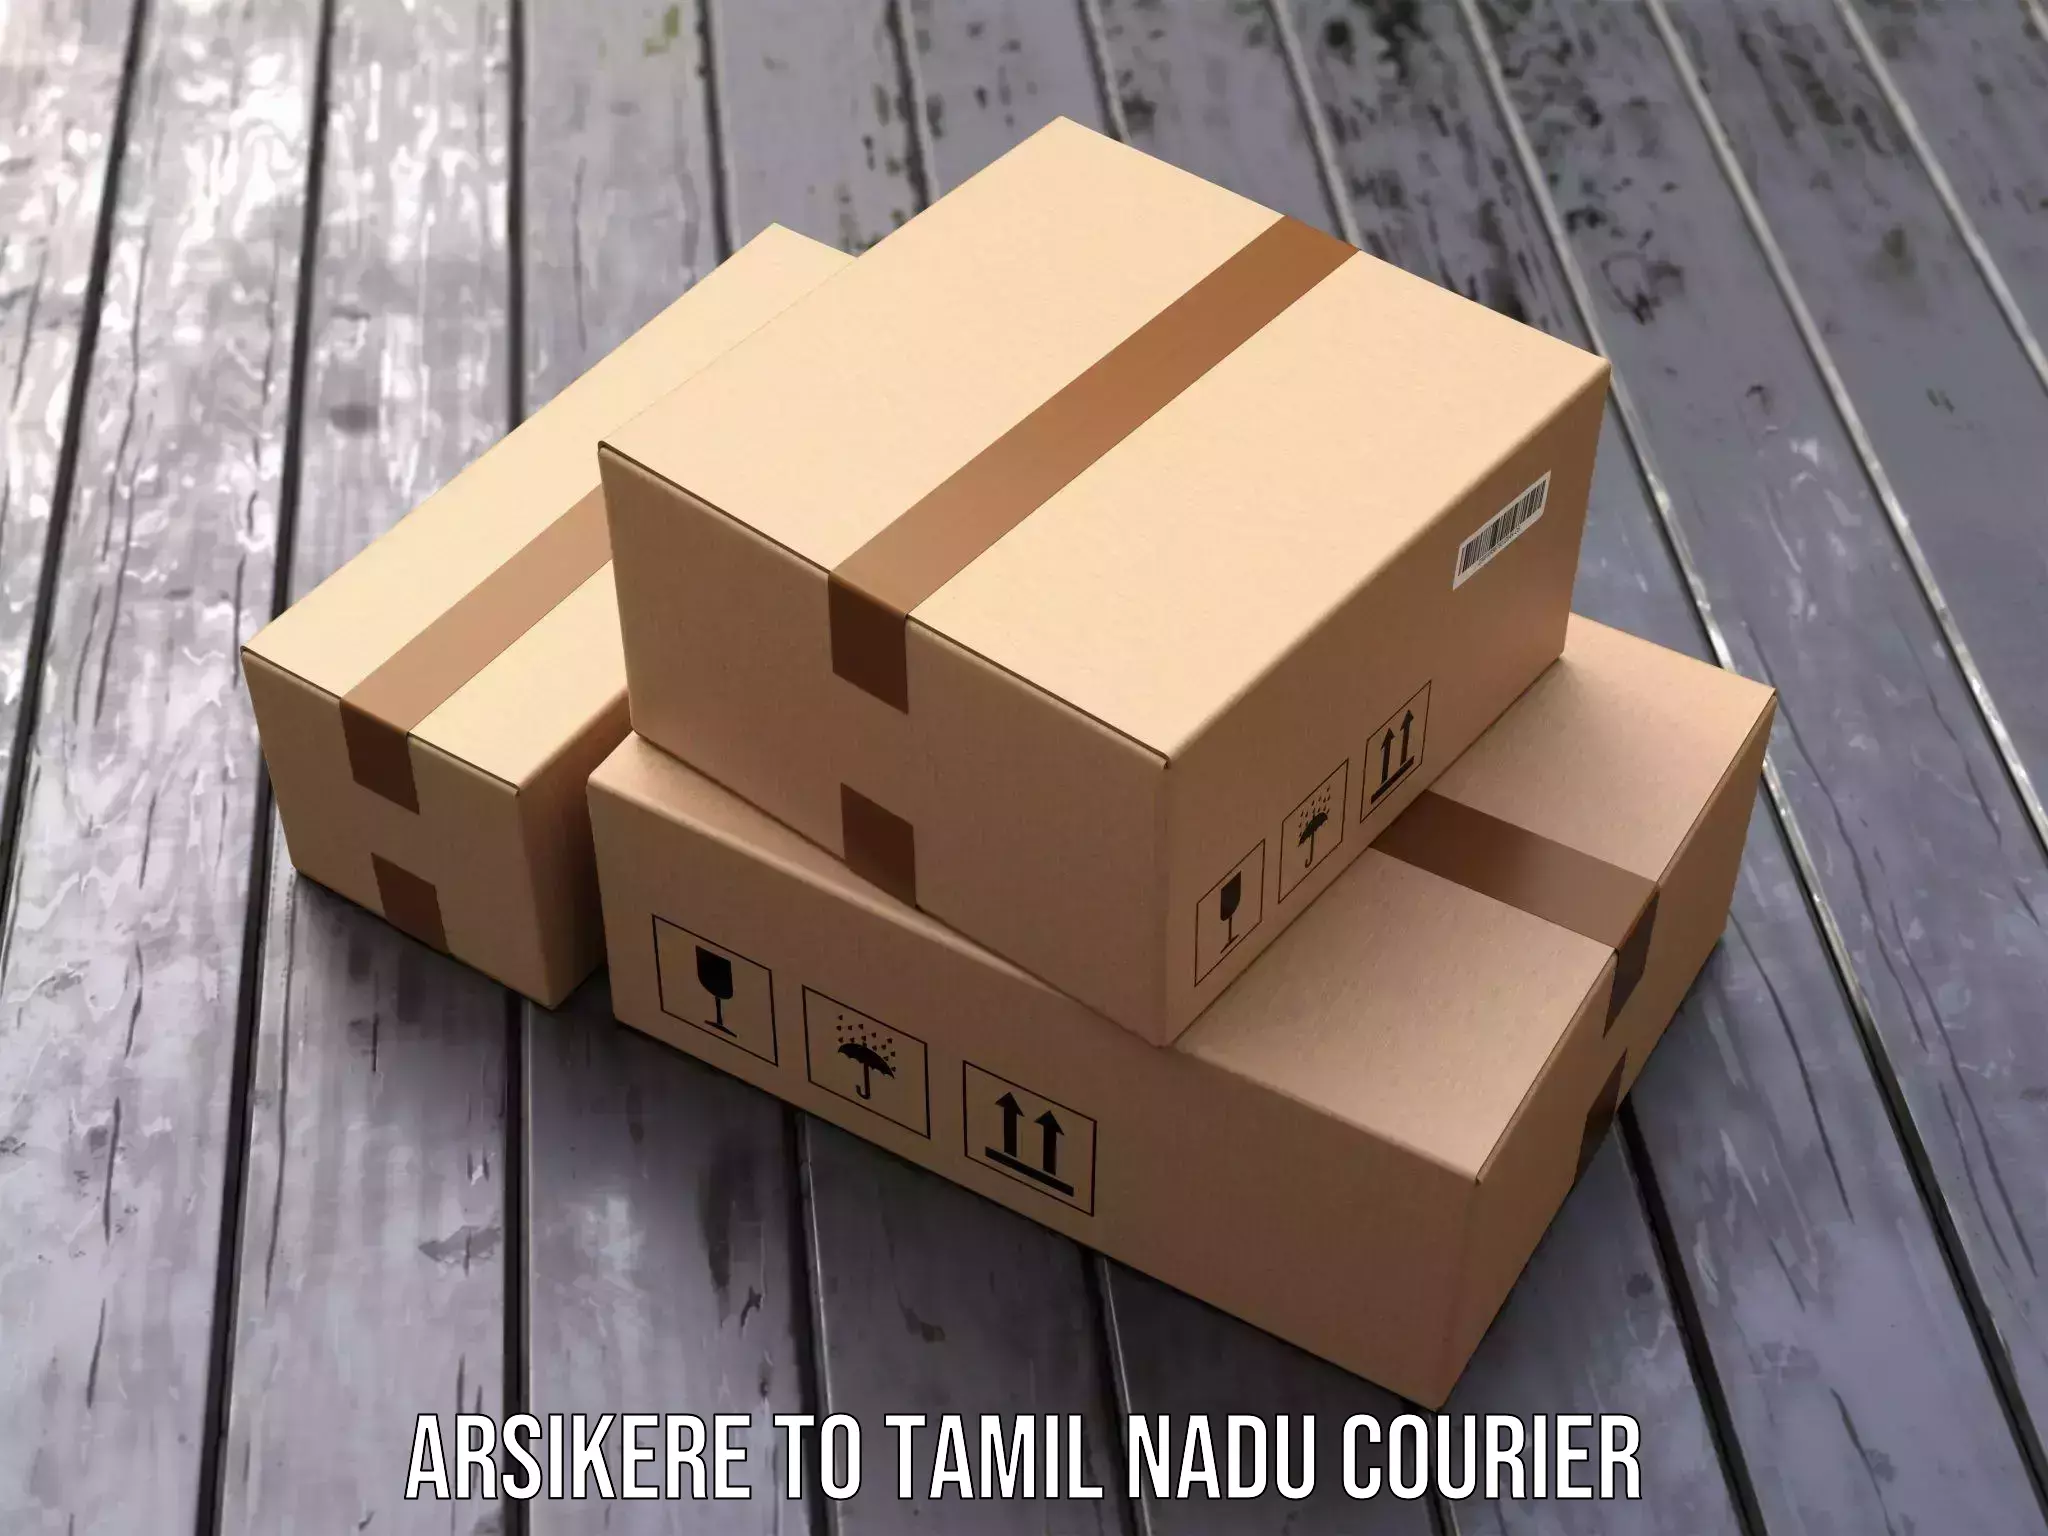 Nationwide shipping capabilities Arsikere to Thuraiyur